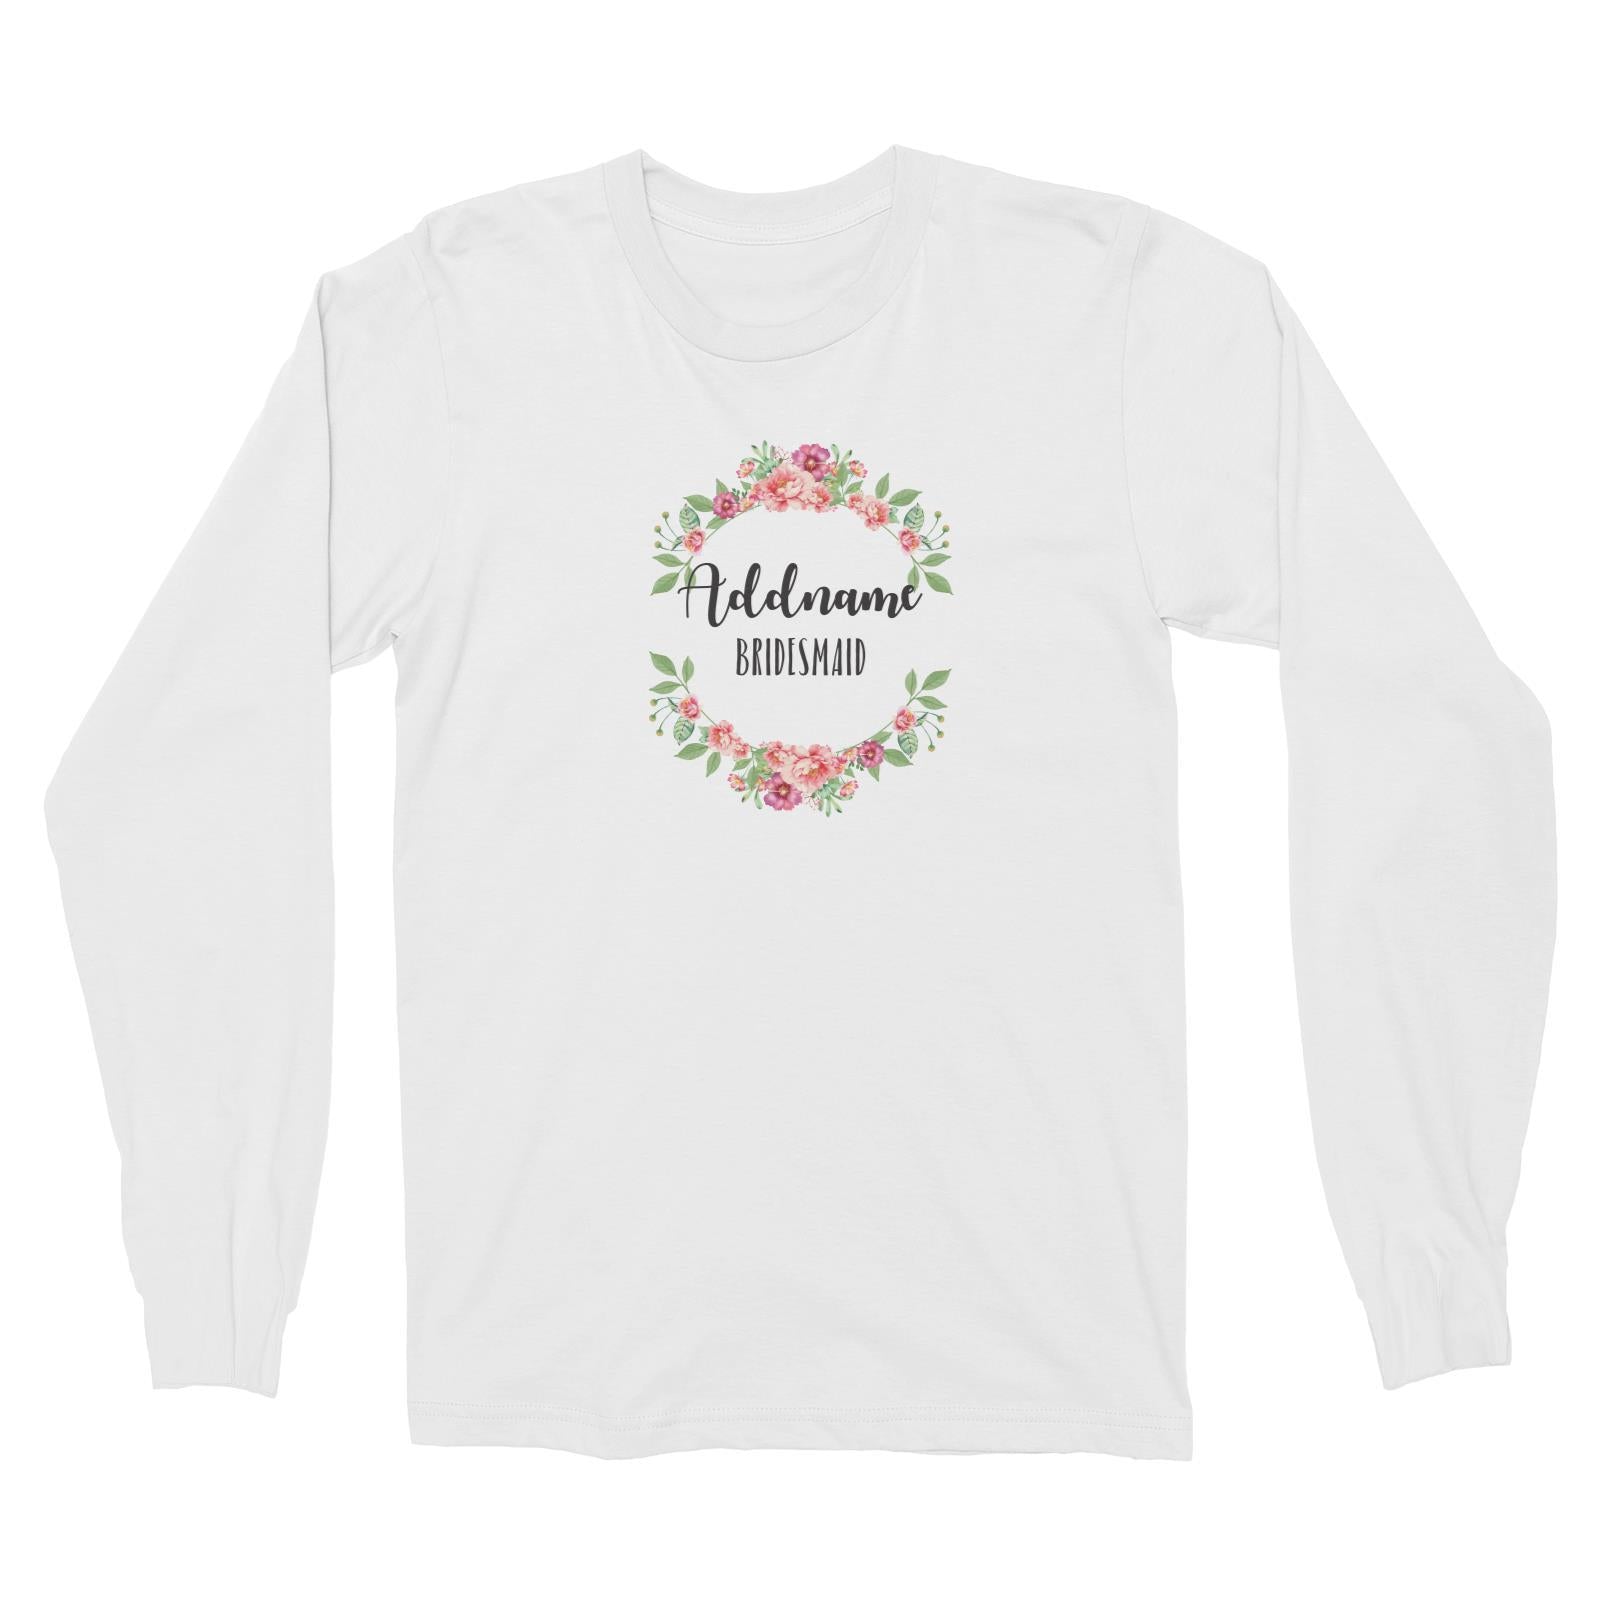 Bridesmaid Floral Sweet Coral Flower Wreath Bridesmaid Addname Long Sleeve Unisex T-Shirt